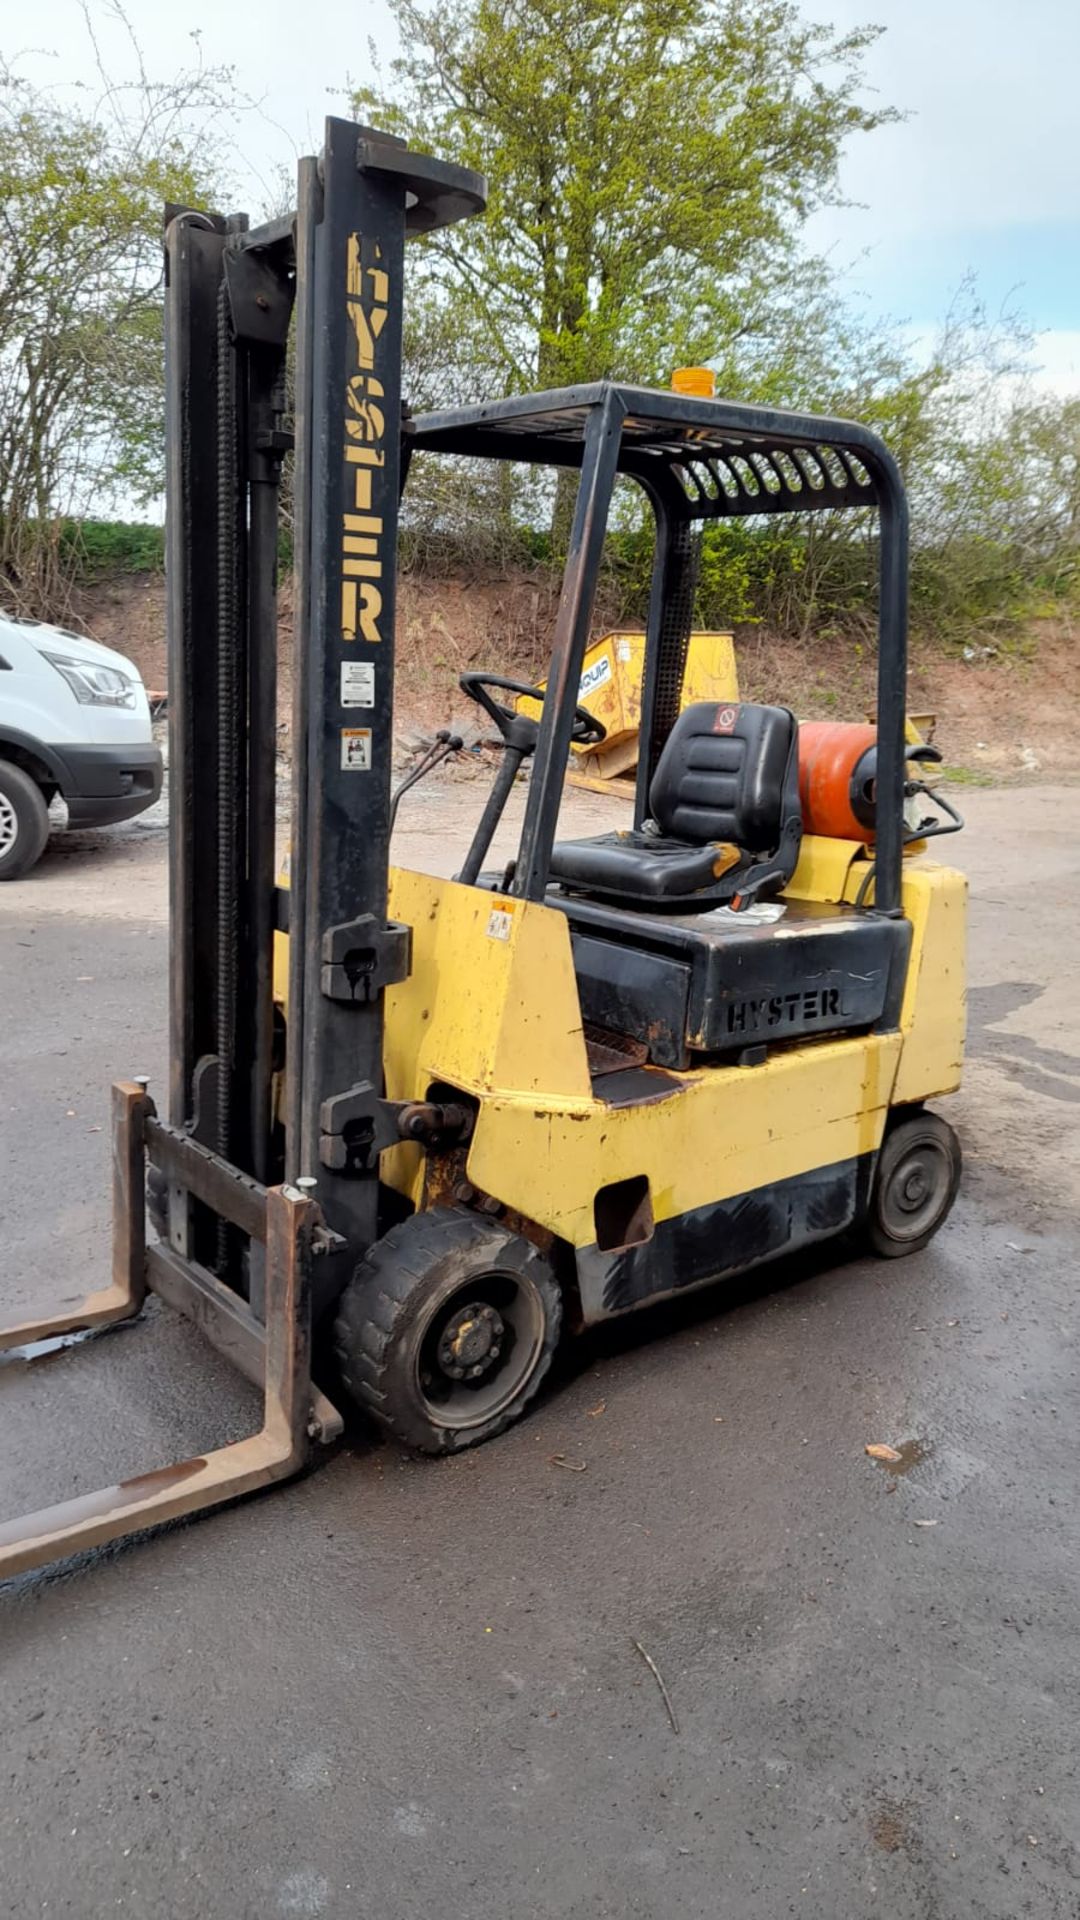 1989 HYSTER S2.00XL 2 TON GAS POWERED FORKLIFT, RUNS DRIVES AND LIFTS *PLUS VAT* - Image 3 of 5